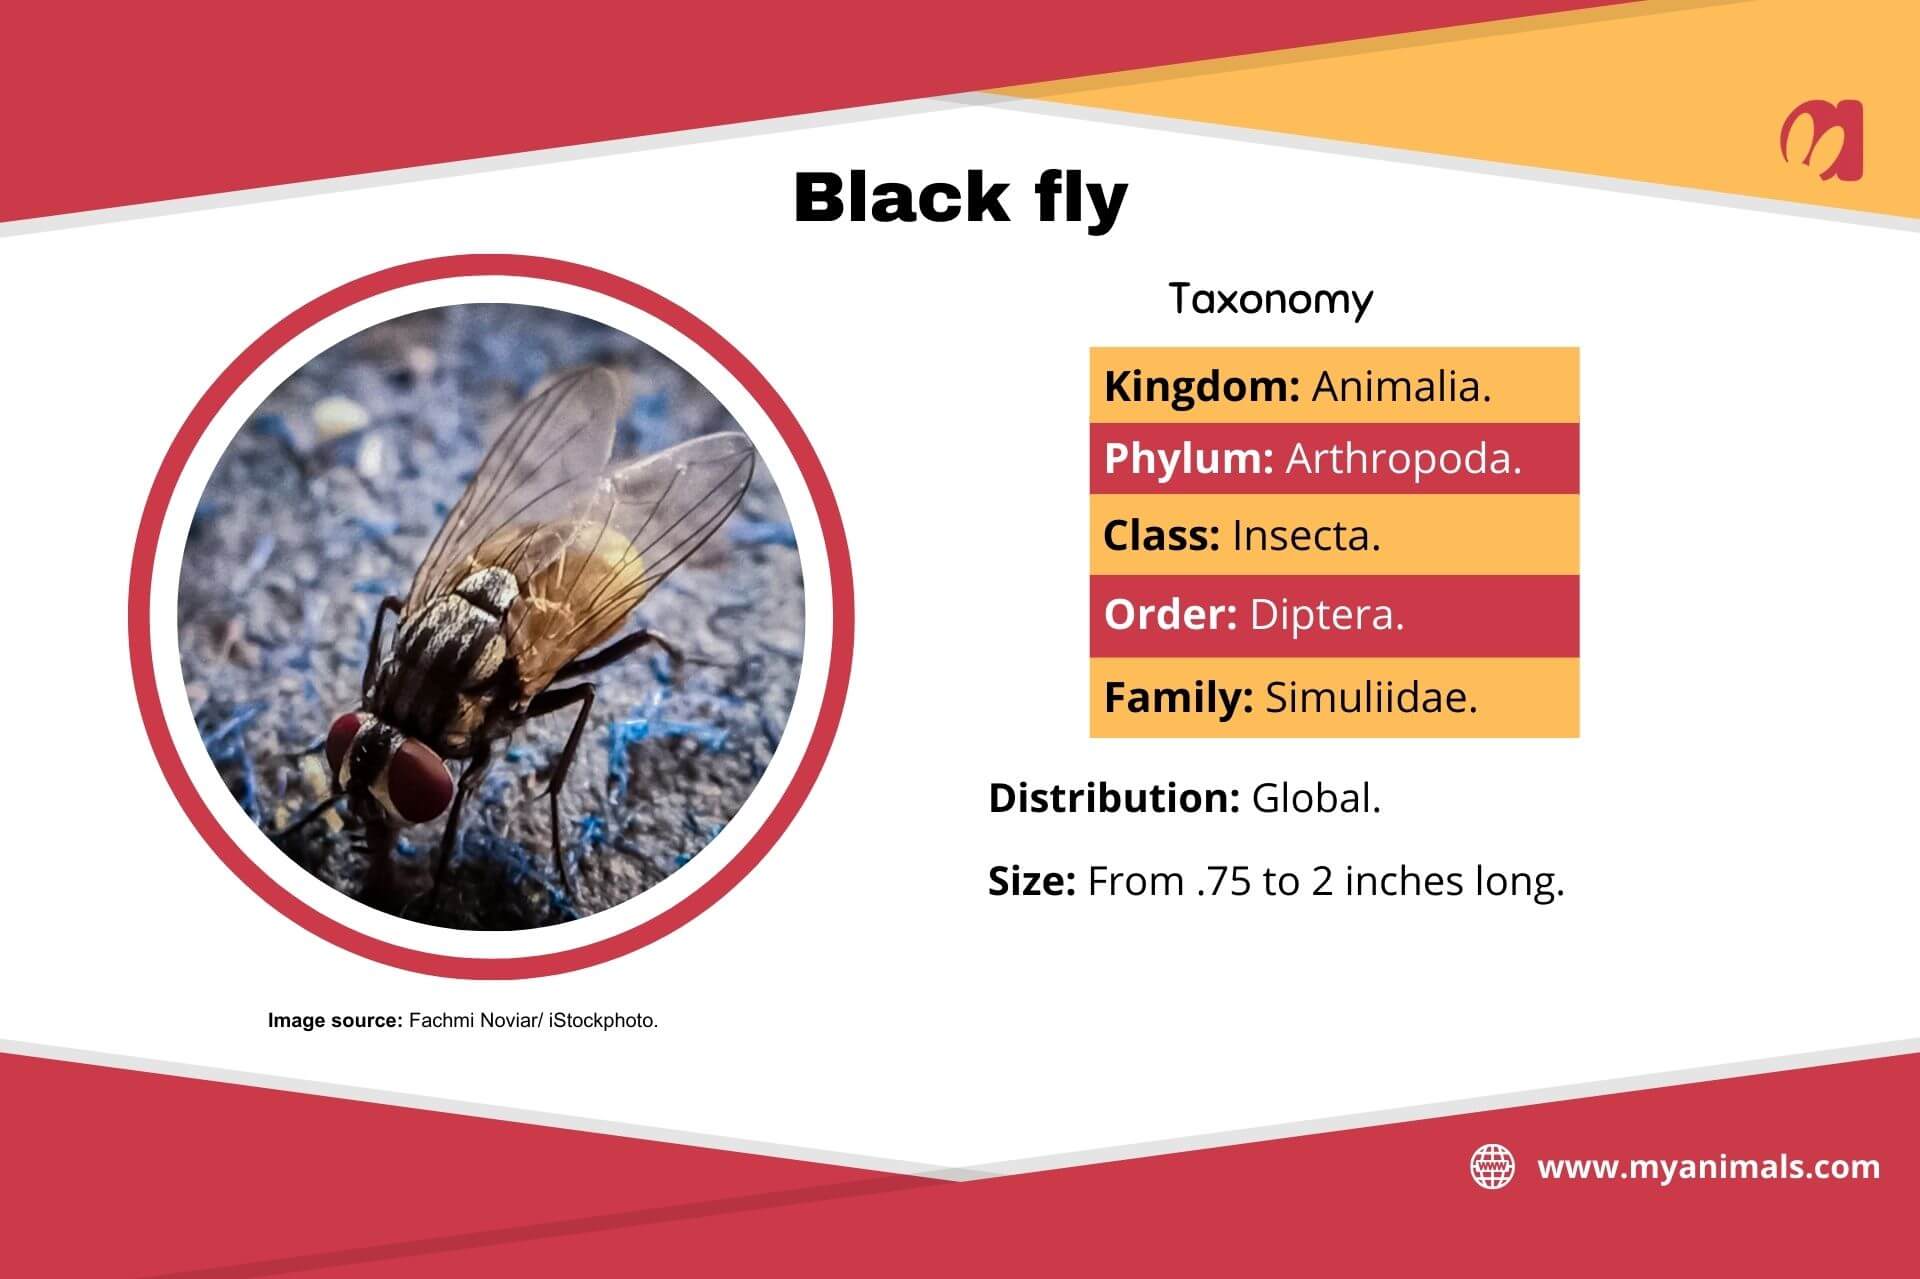 Information on the black fly.